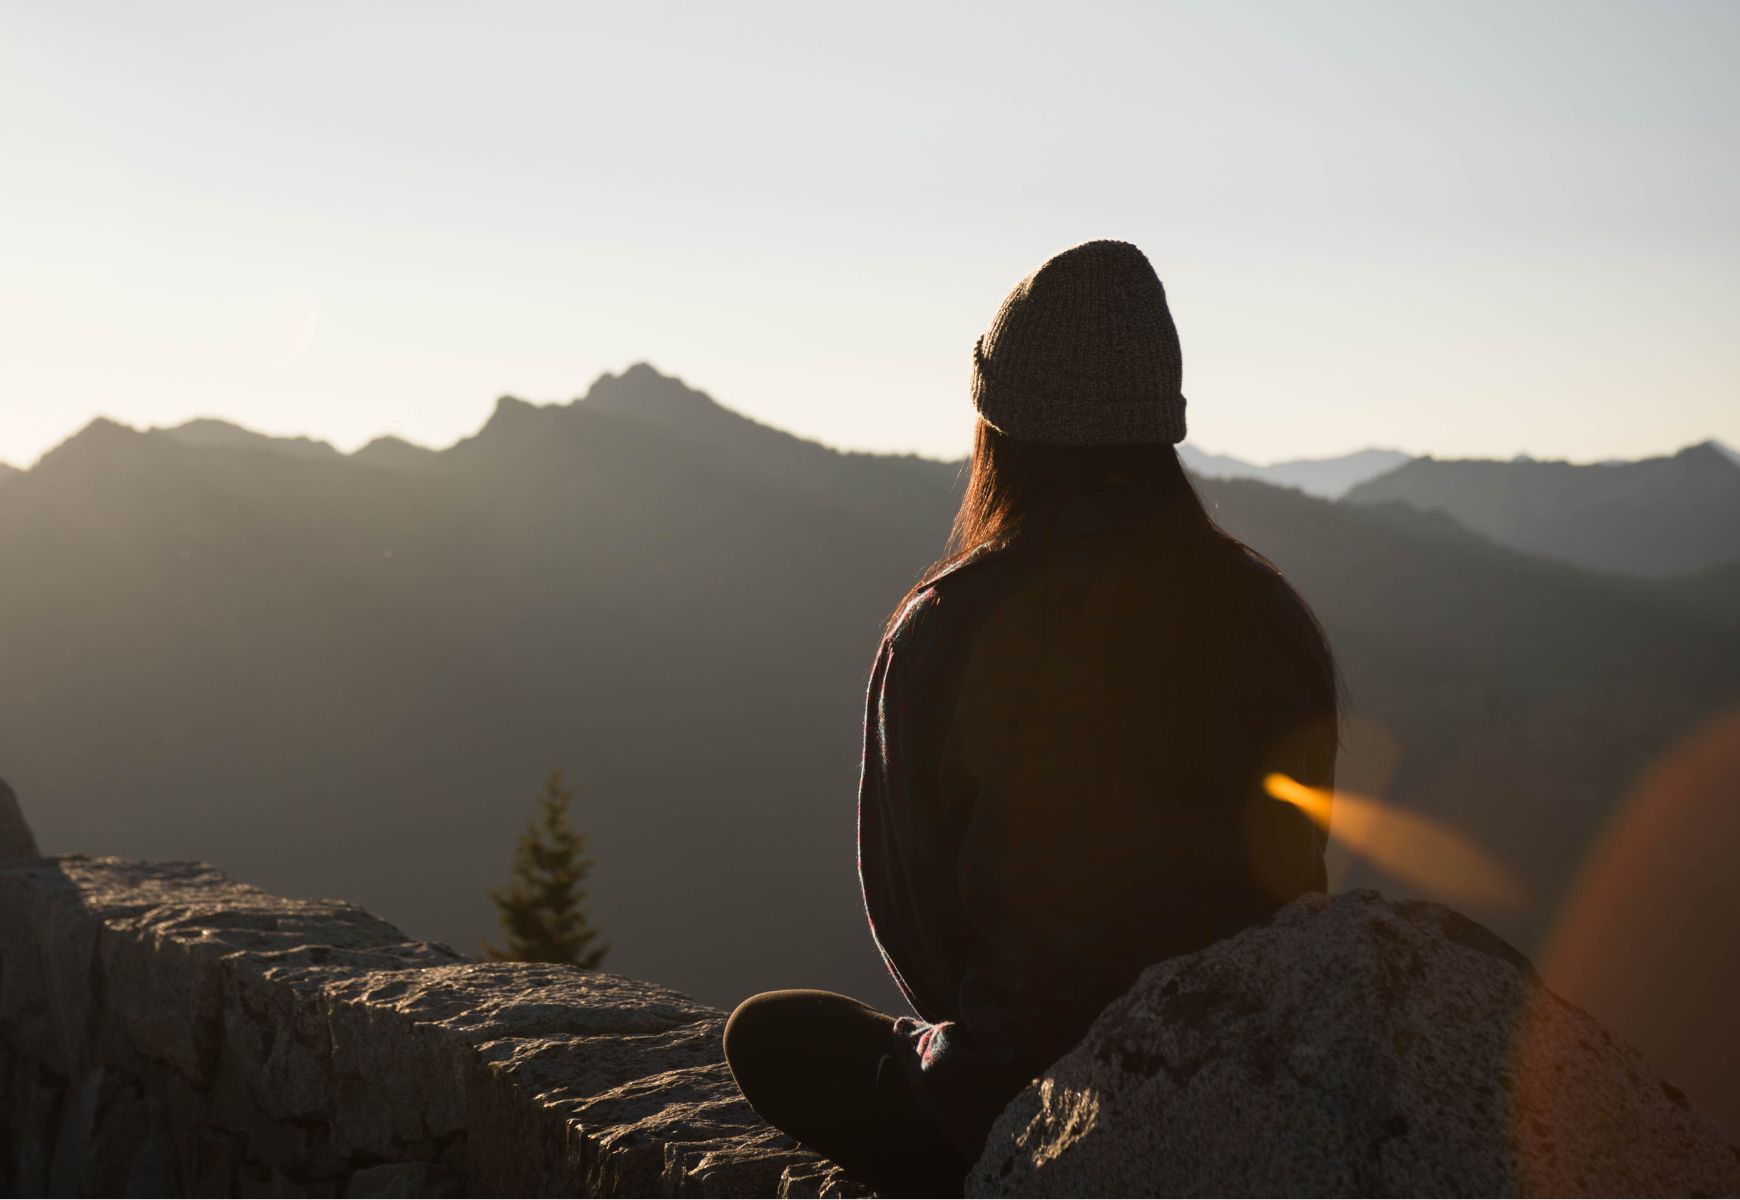 silhouette of a woman sitting on rocks looking out over a mountain with sunrise in the background